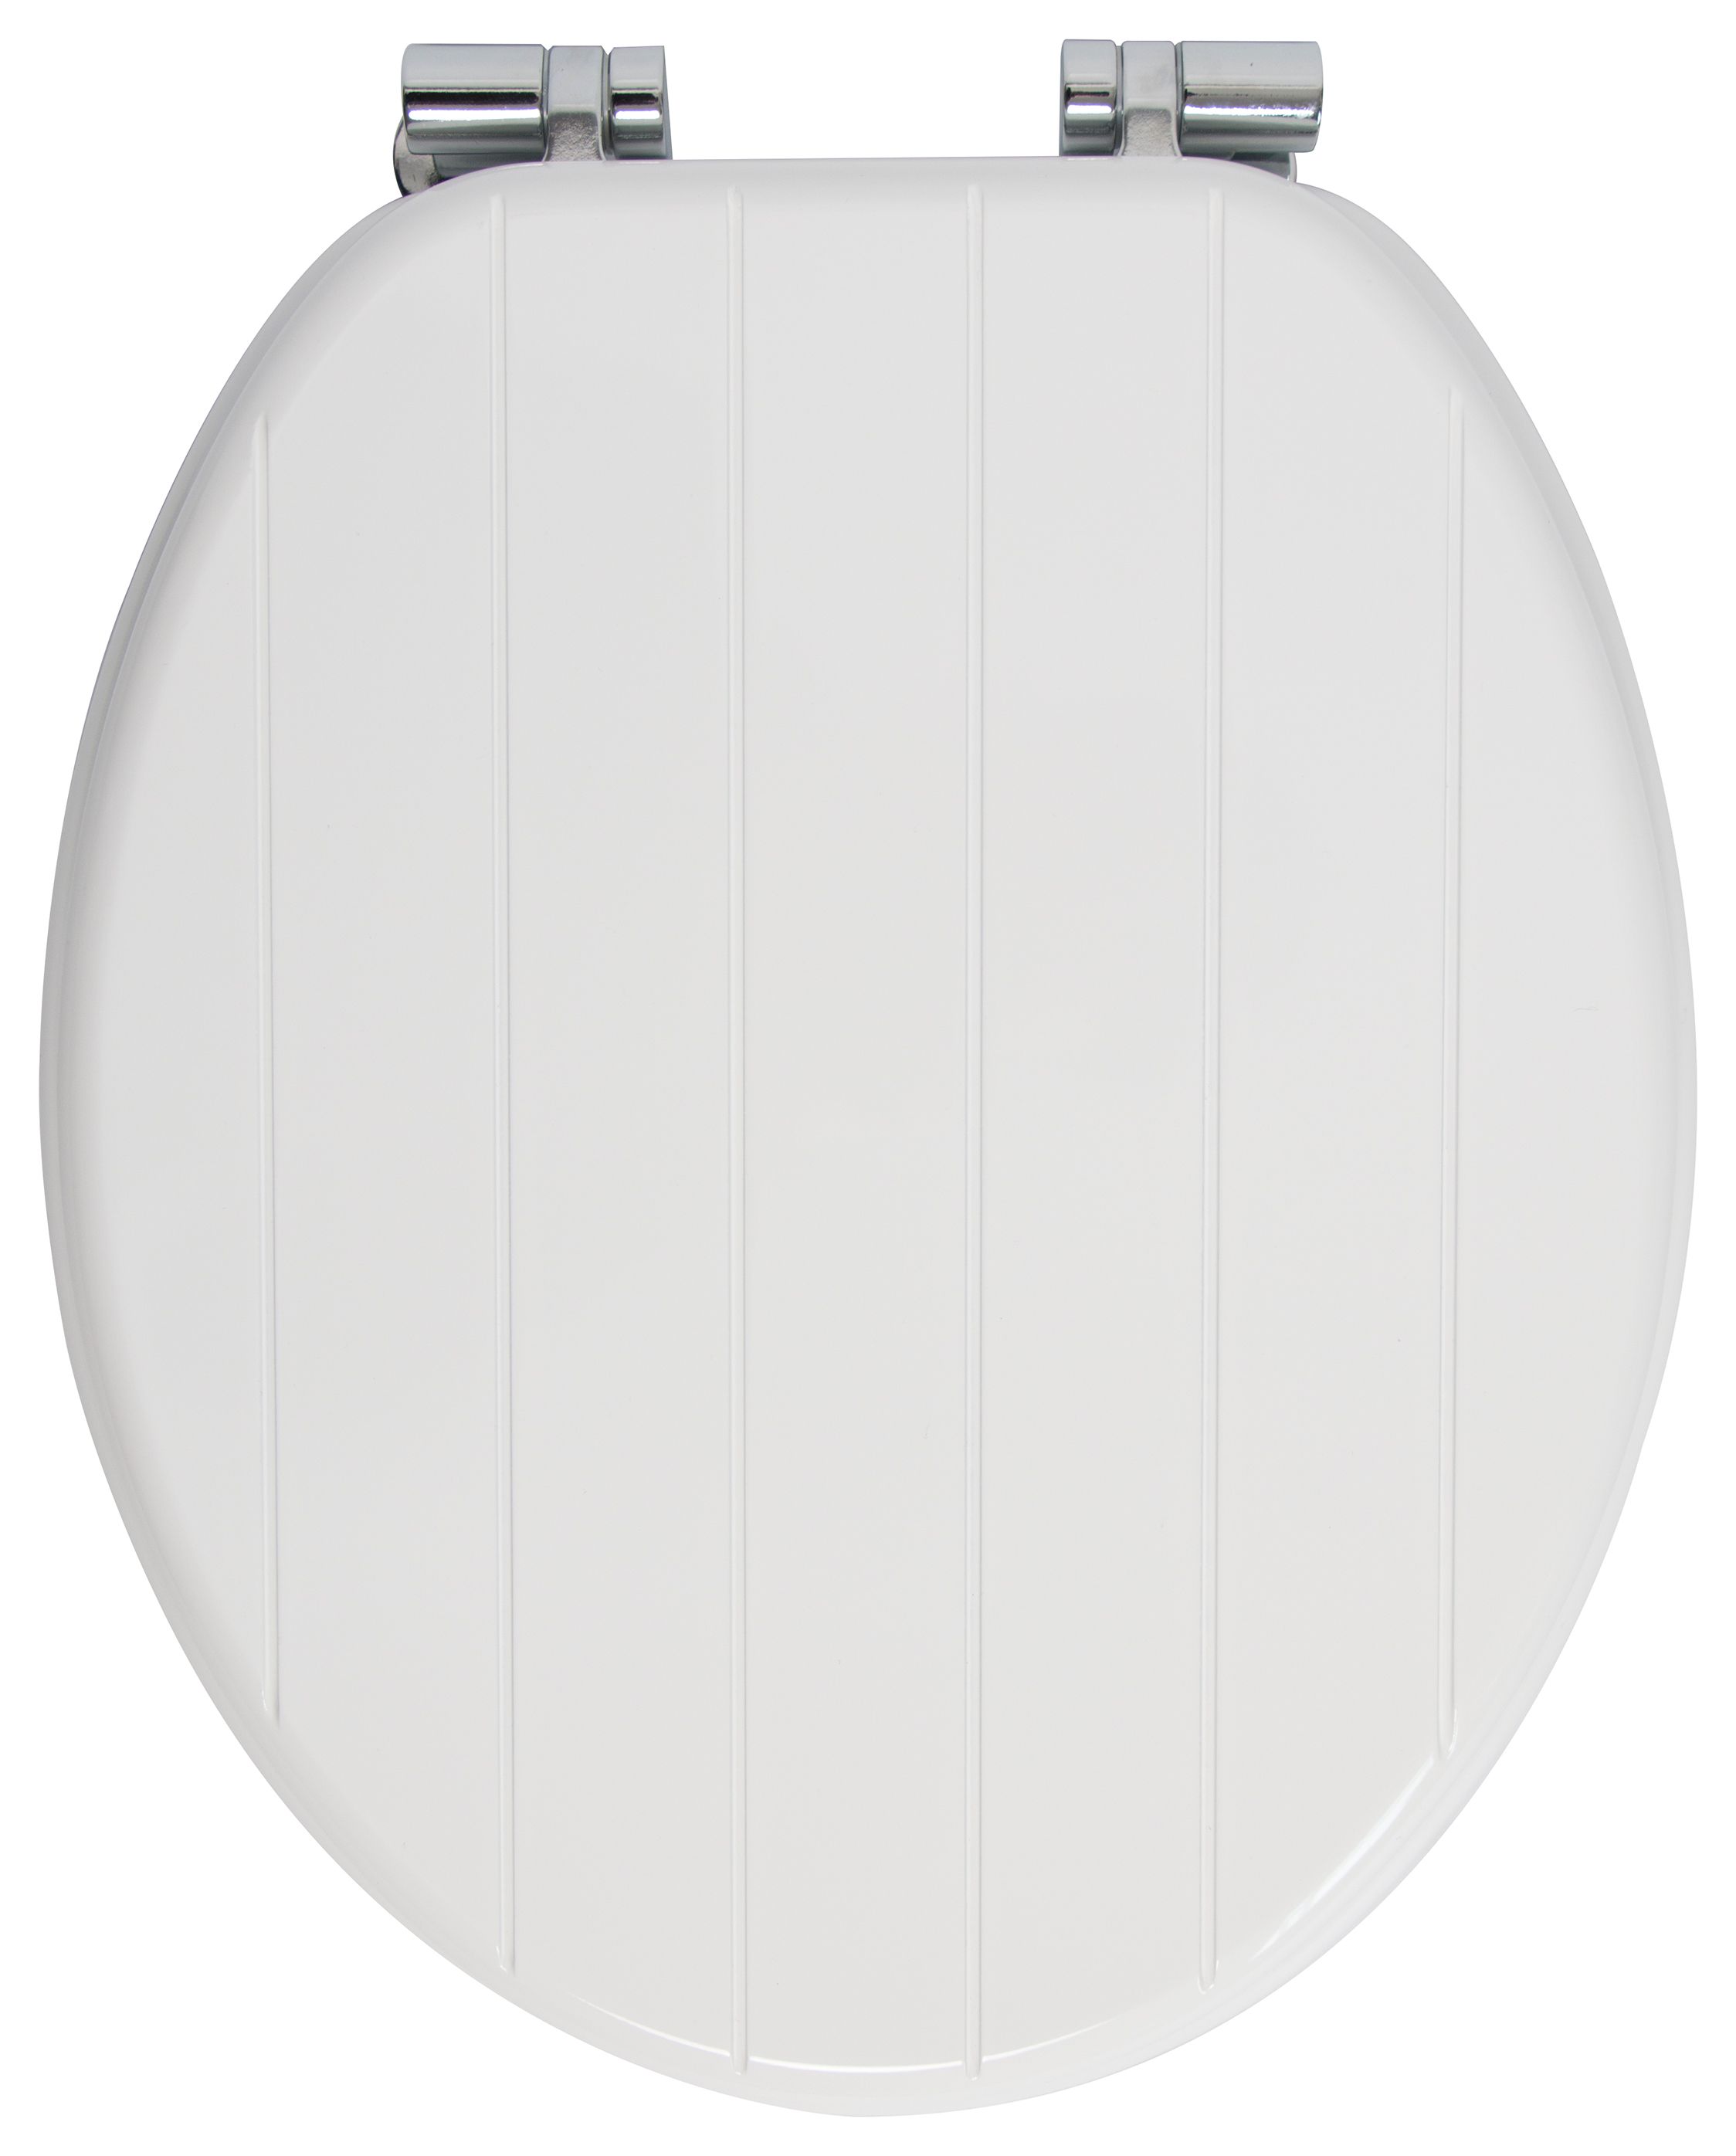 Wickes Tongue & Groove Wood Effect Soft Close Toilet Seat - White